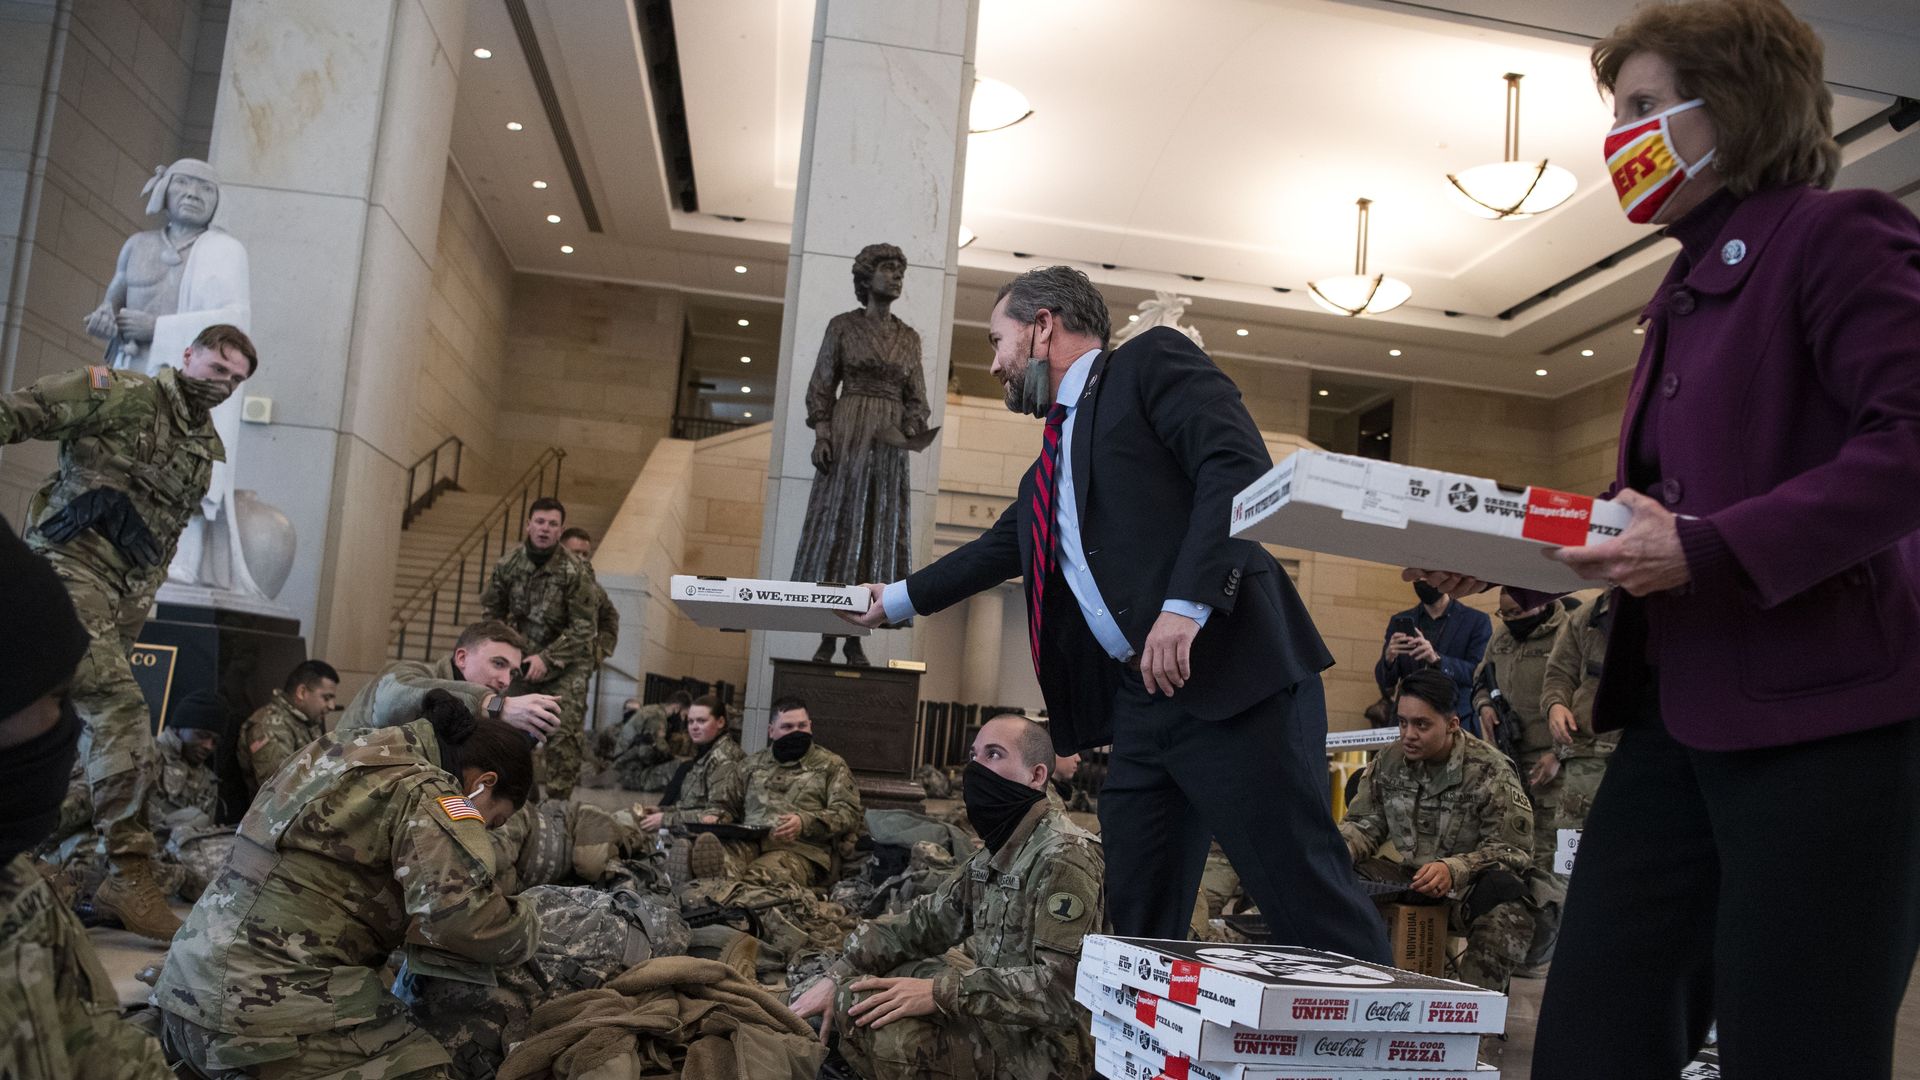 Lawmakers hand out pizza to national guard